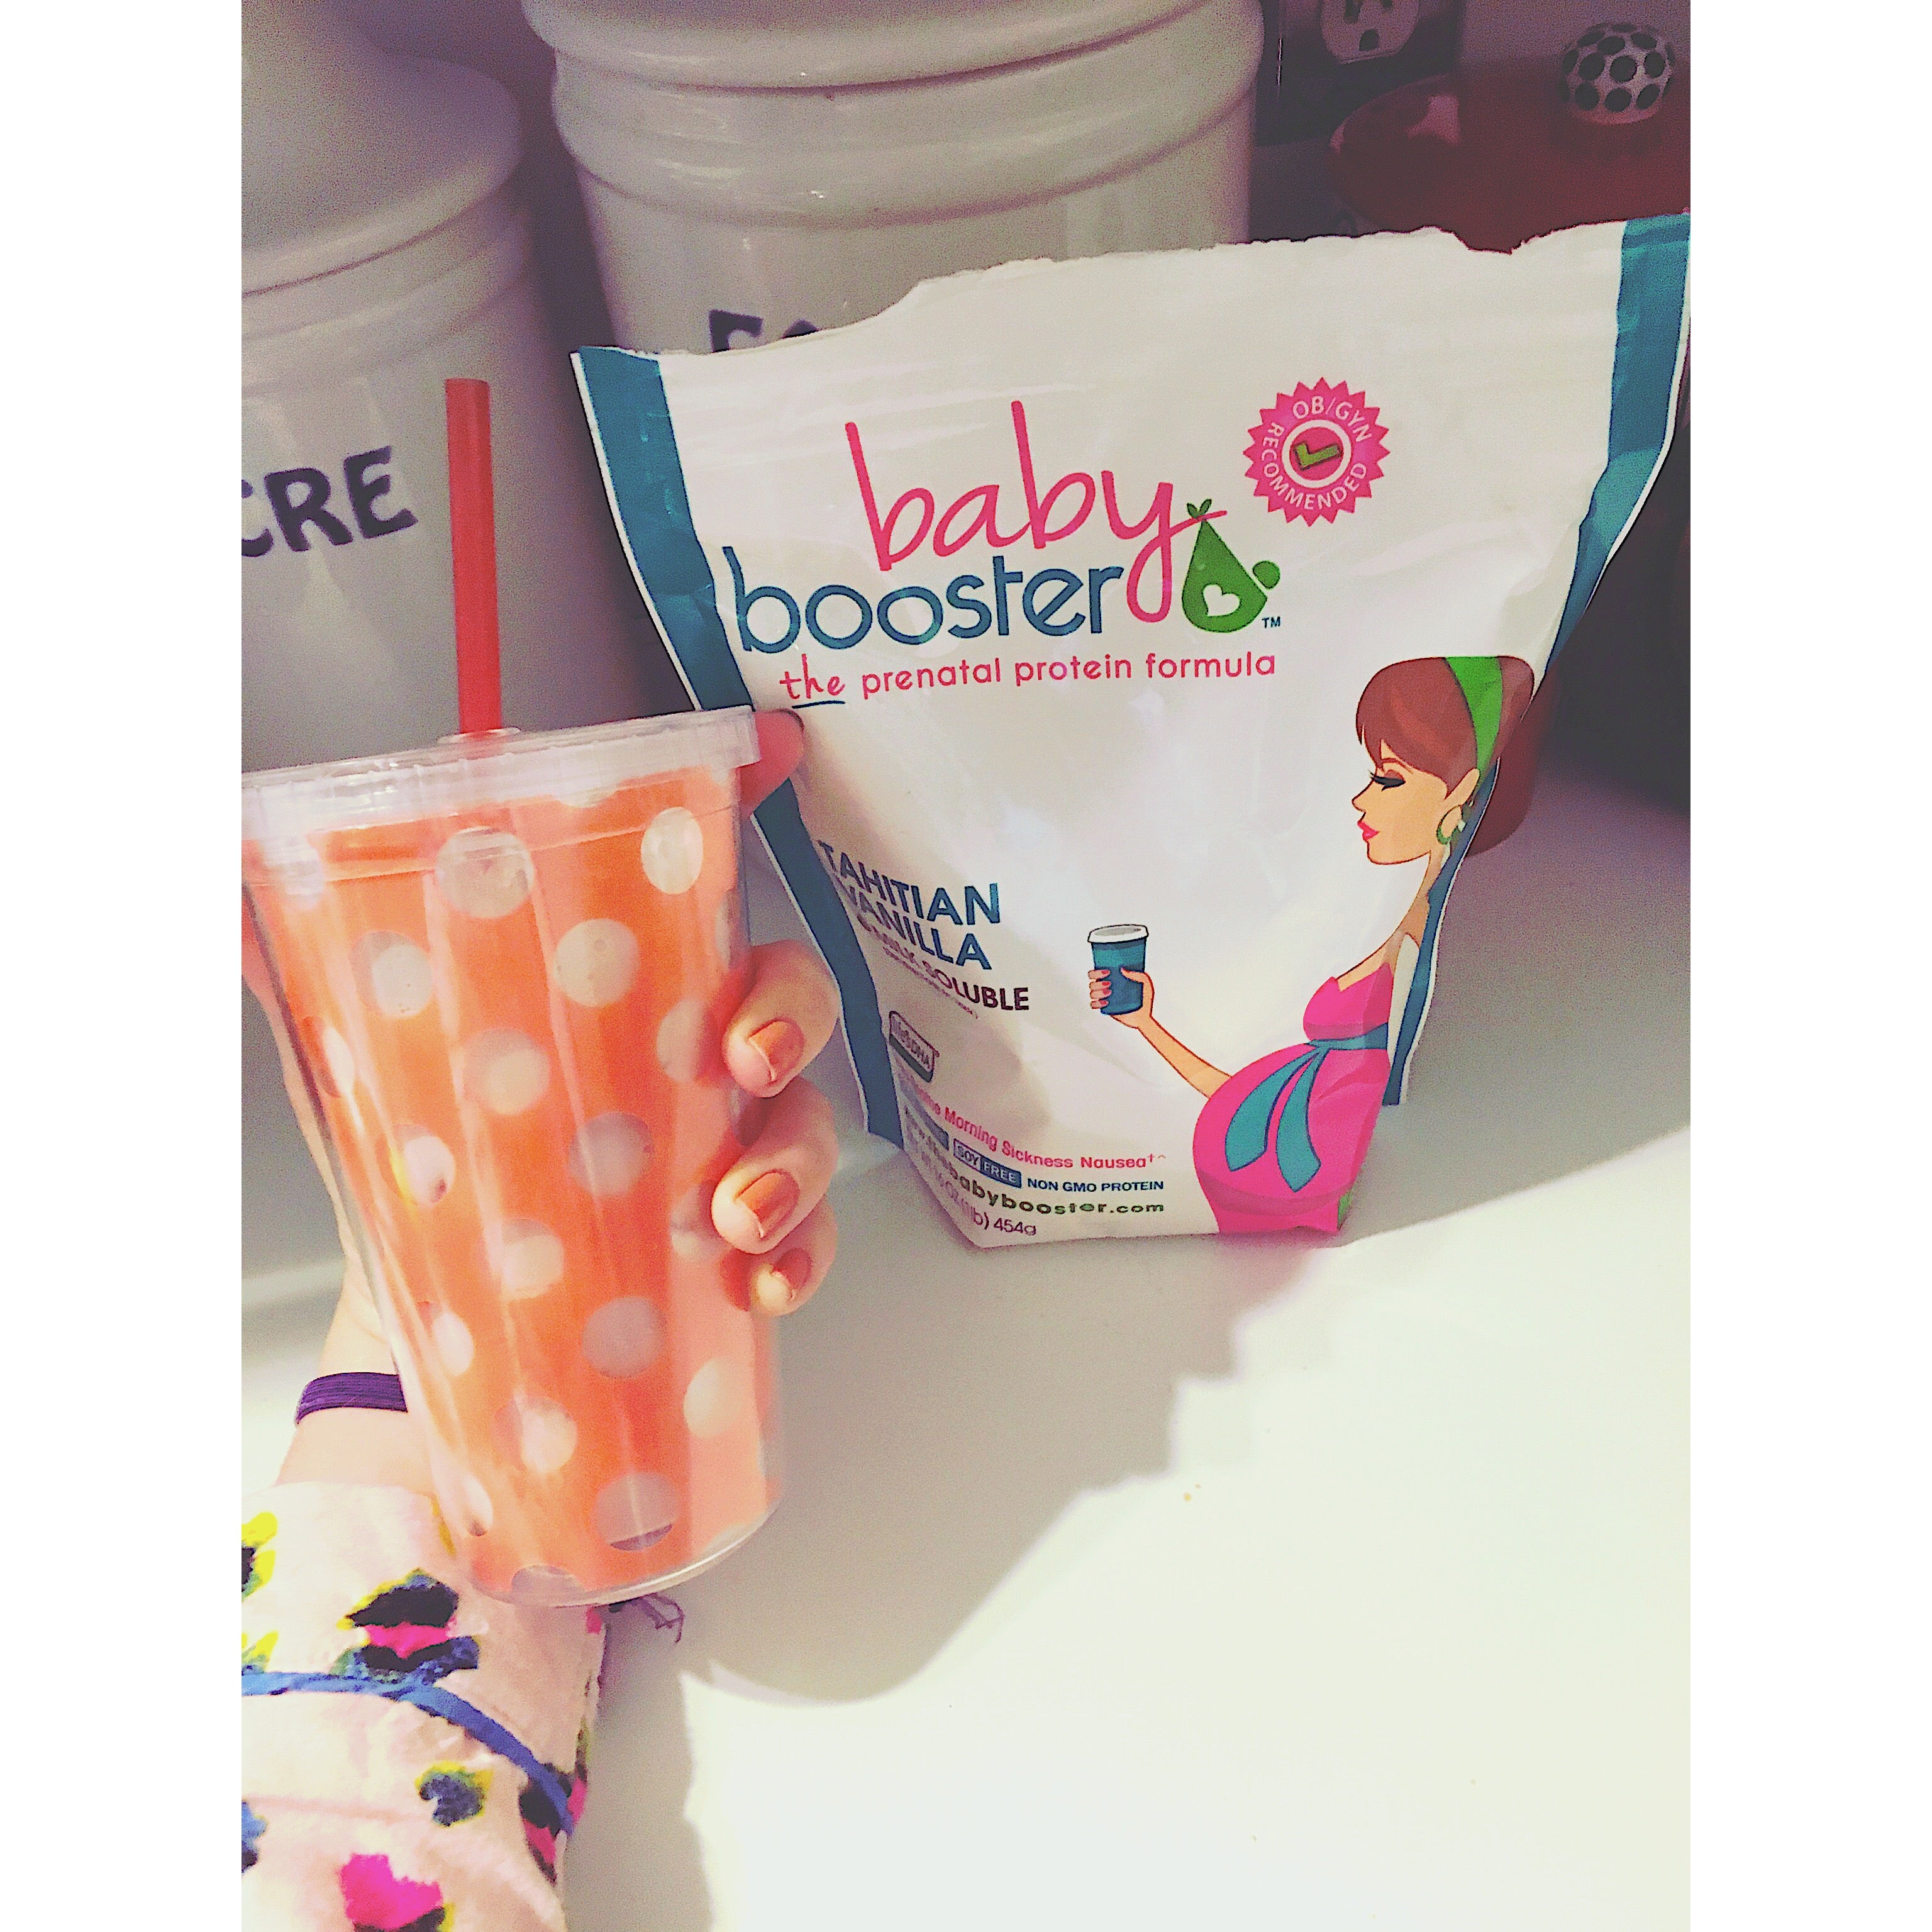 Mixed Berry Smoothie,Baby Booster, Booby Booster, Prenatal Protein, Pregnancy, Breastfeeding, Lactation Supplement